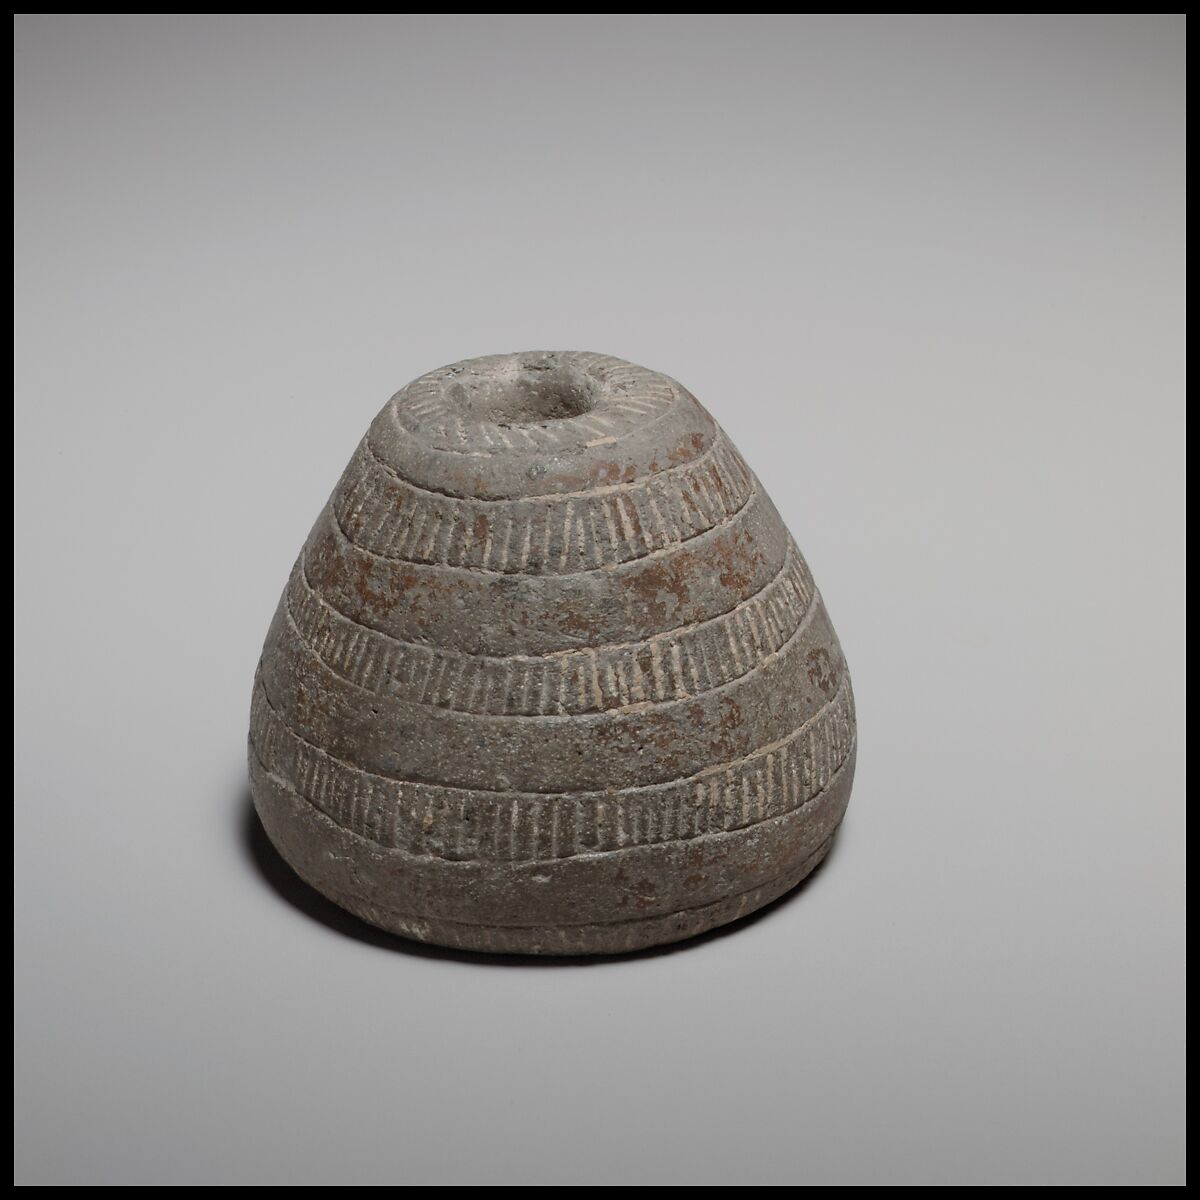 Conical spindle-whorl with flat base, Terracotta, Cypriot 